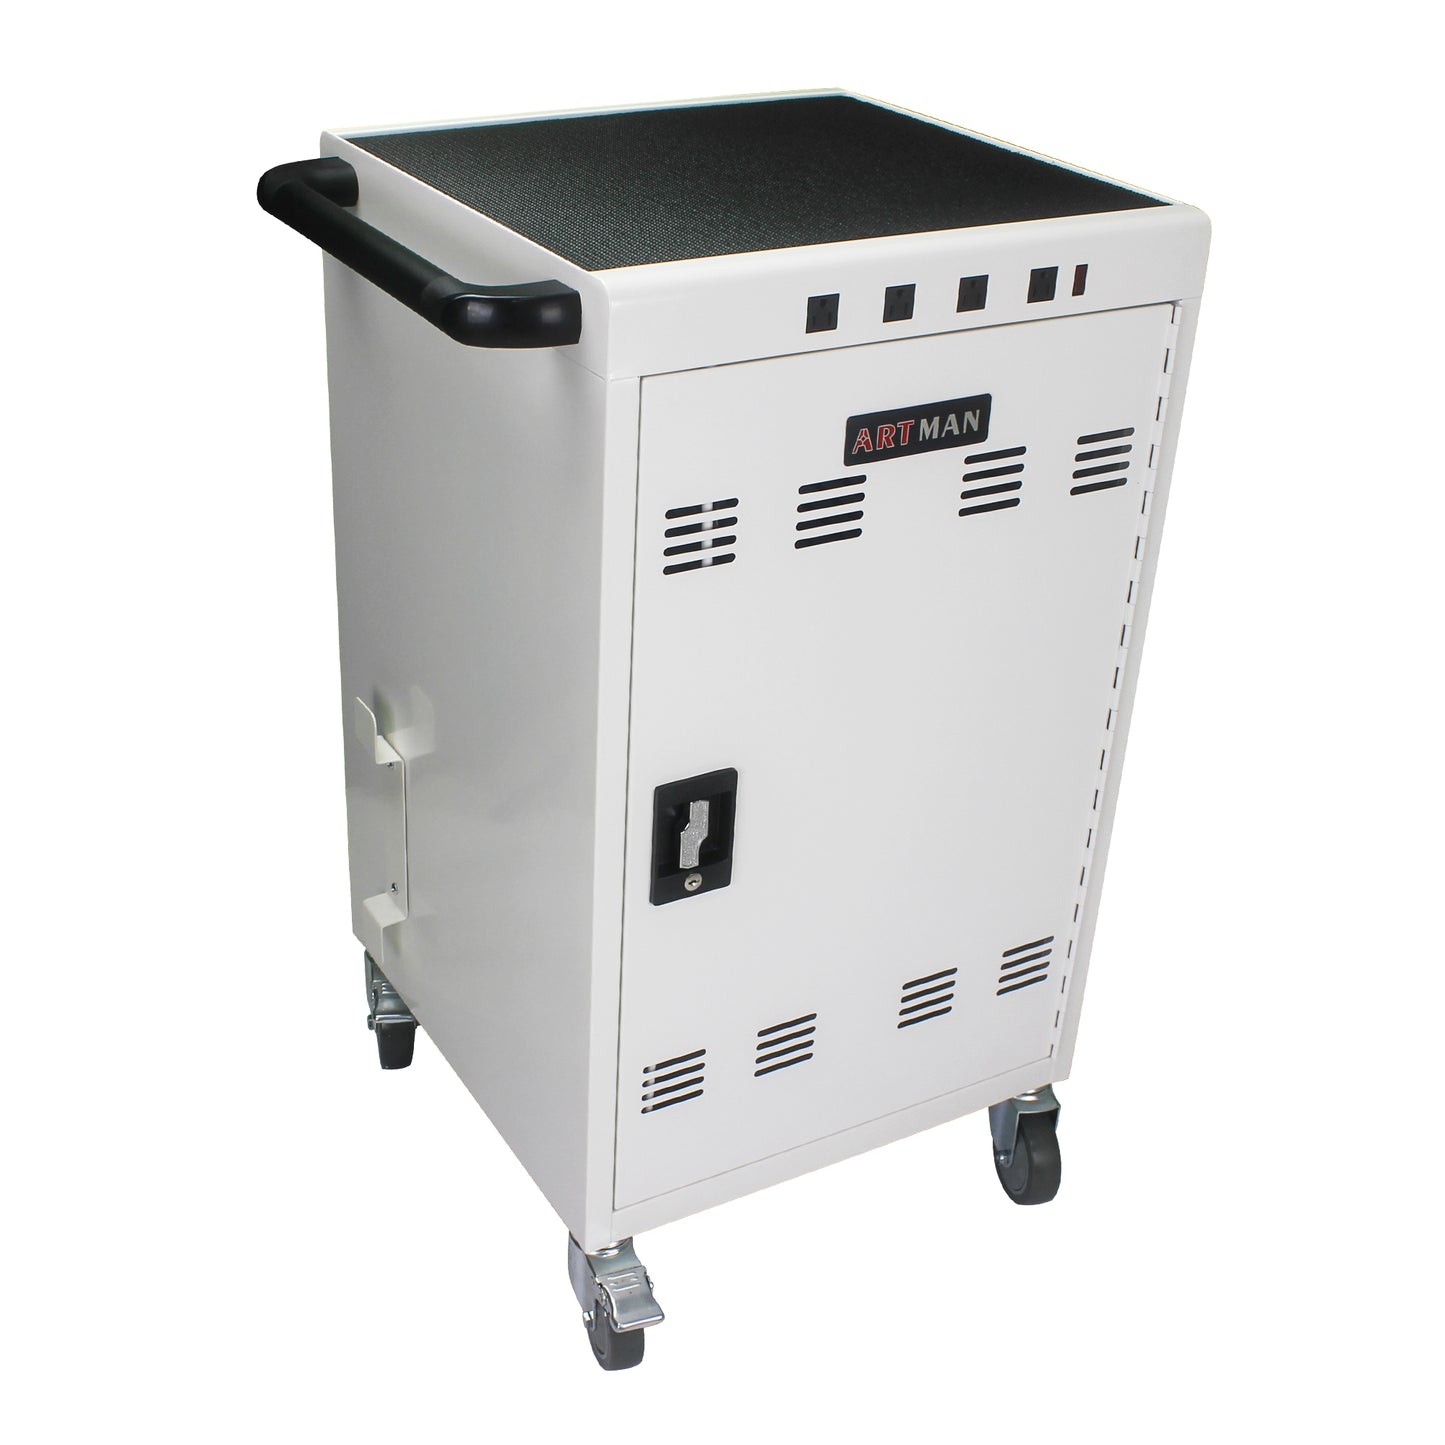 Mobile Charging Cart and Cabinet for Tablets, Laptops 31+4-Device